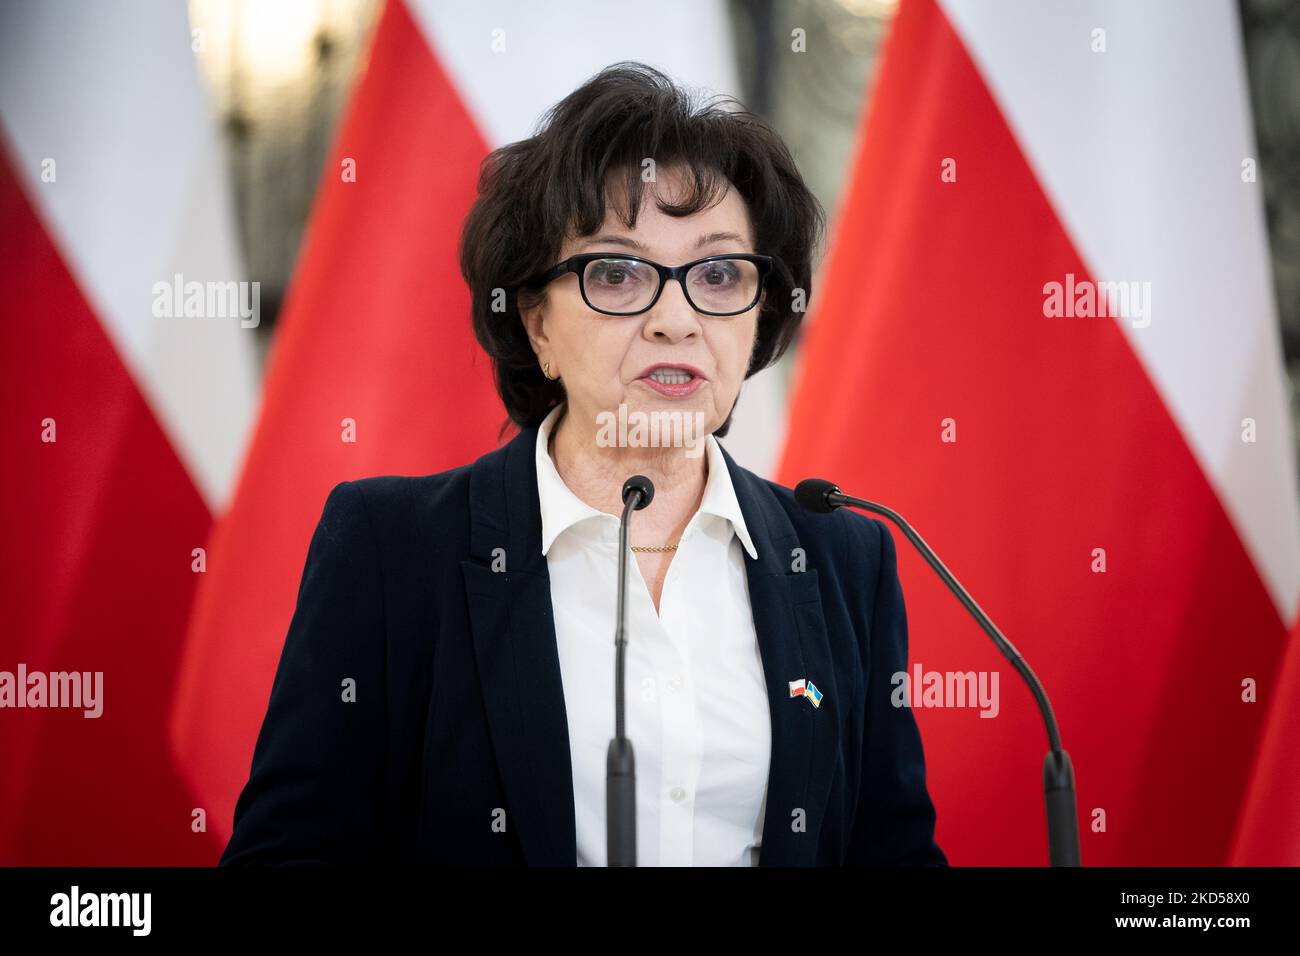 Marshal of the Sejm Elzbieta Witek during the 50th session of the Sejm (lower house of Polish Parliament) in Warsaw, Poland on March 8, 2022 (Photo by Mateusz Wlodarczyk/NurPhoto) Stock Photo